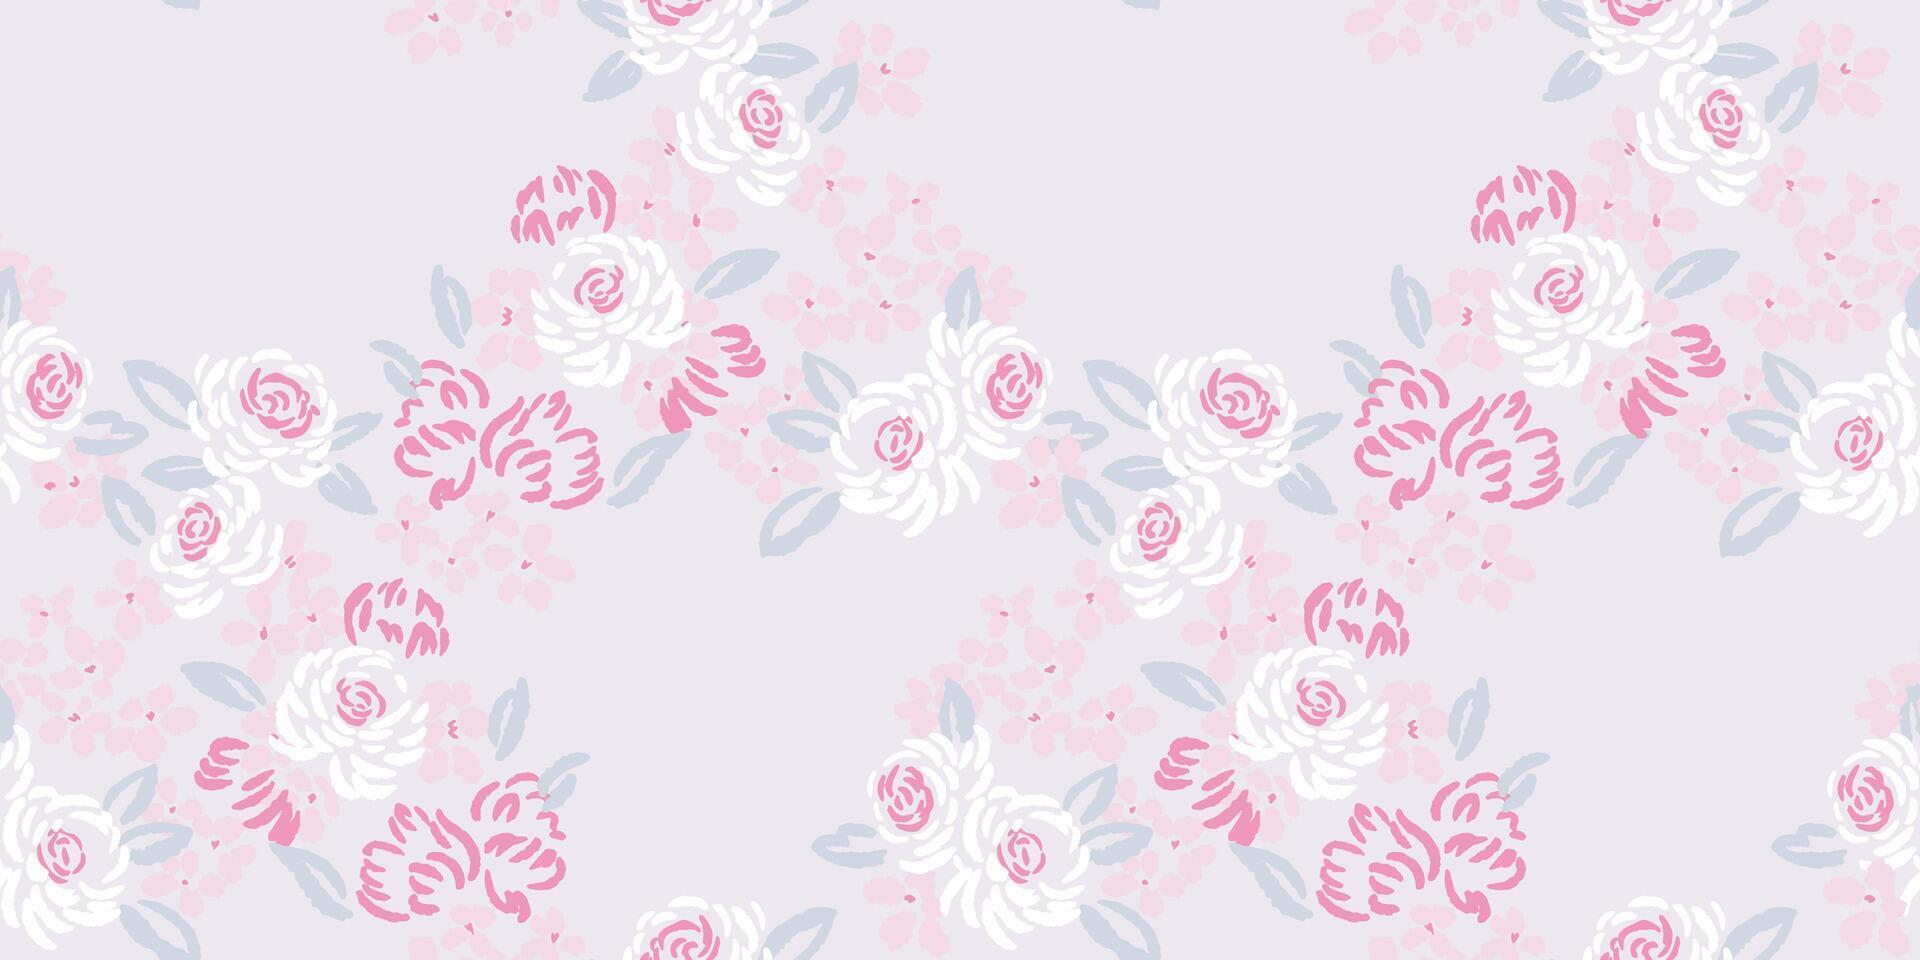 Light pastel creative gently floral patterned. Seamless abstract, artistic simple rose flowers, tiny leaves, buds, pattern. Vector hand drawn sketch. Template for design, printing, collage, fabric